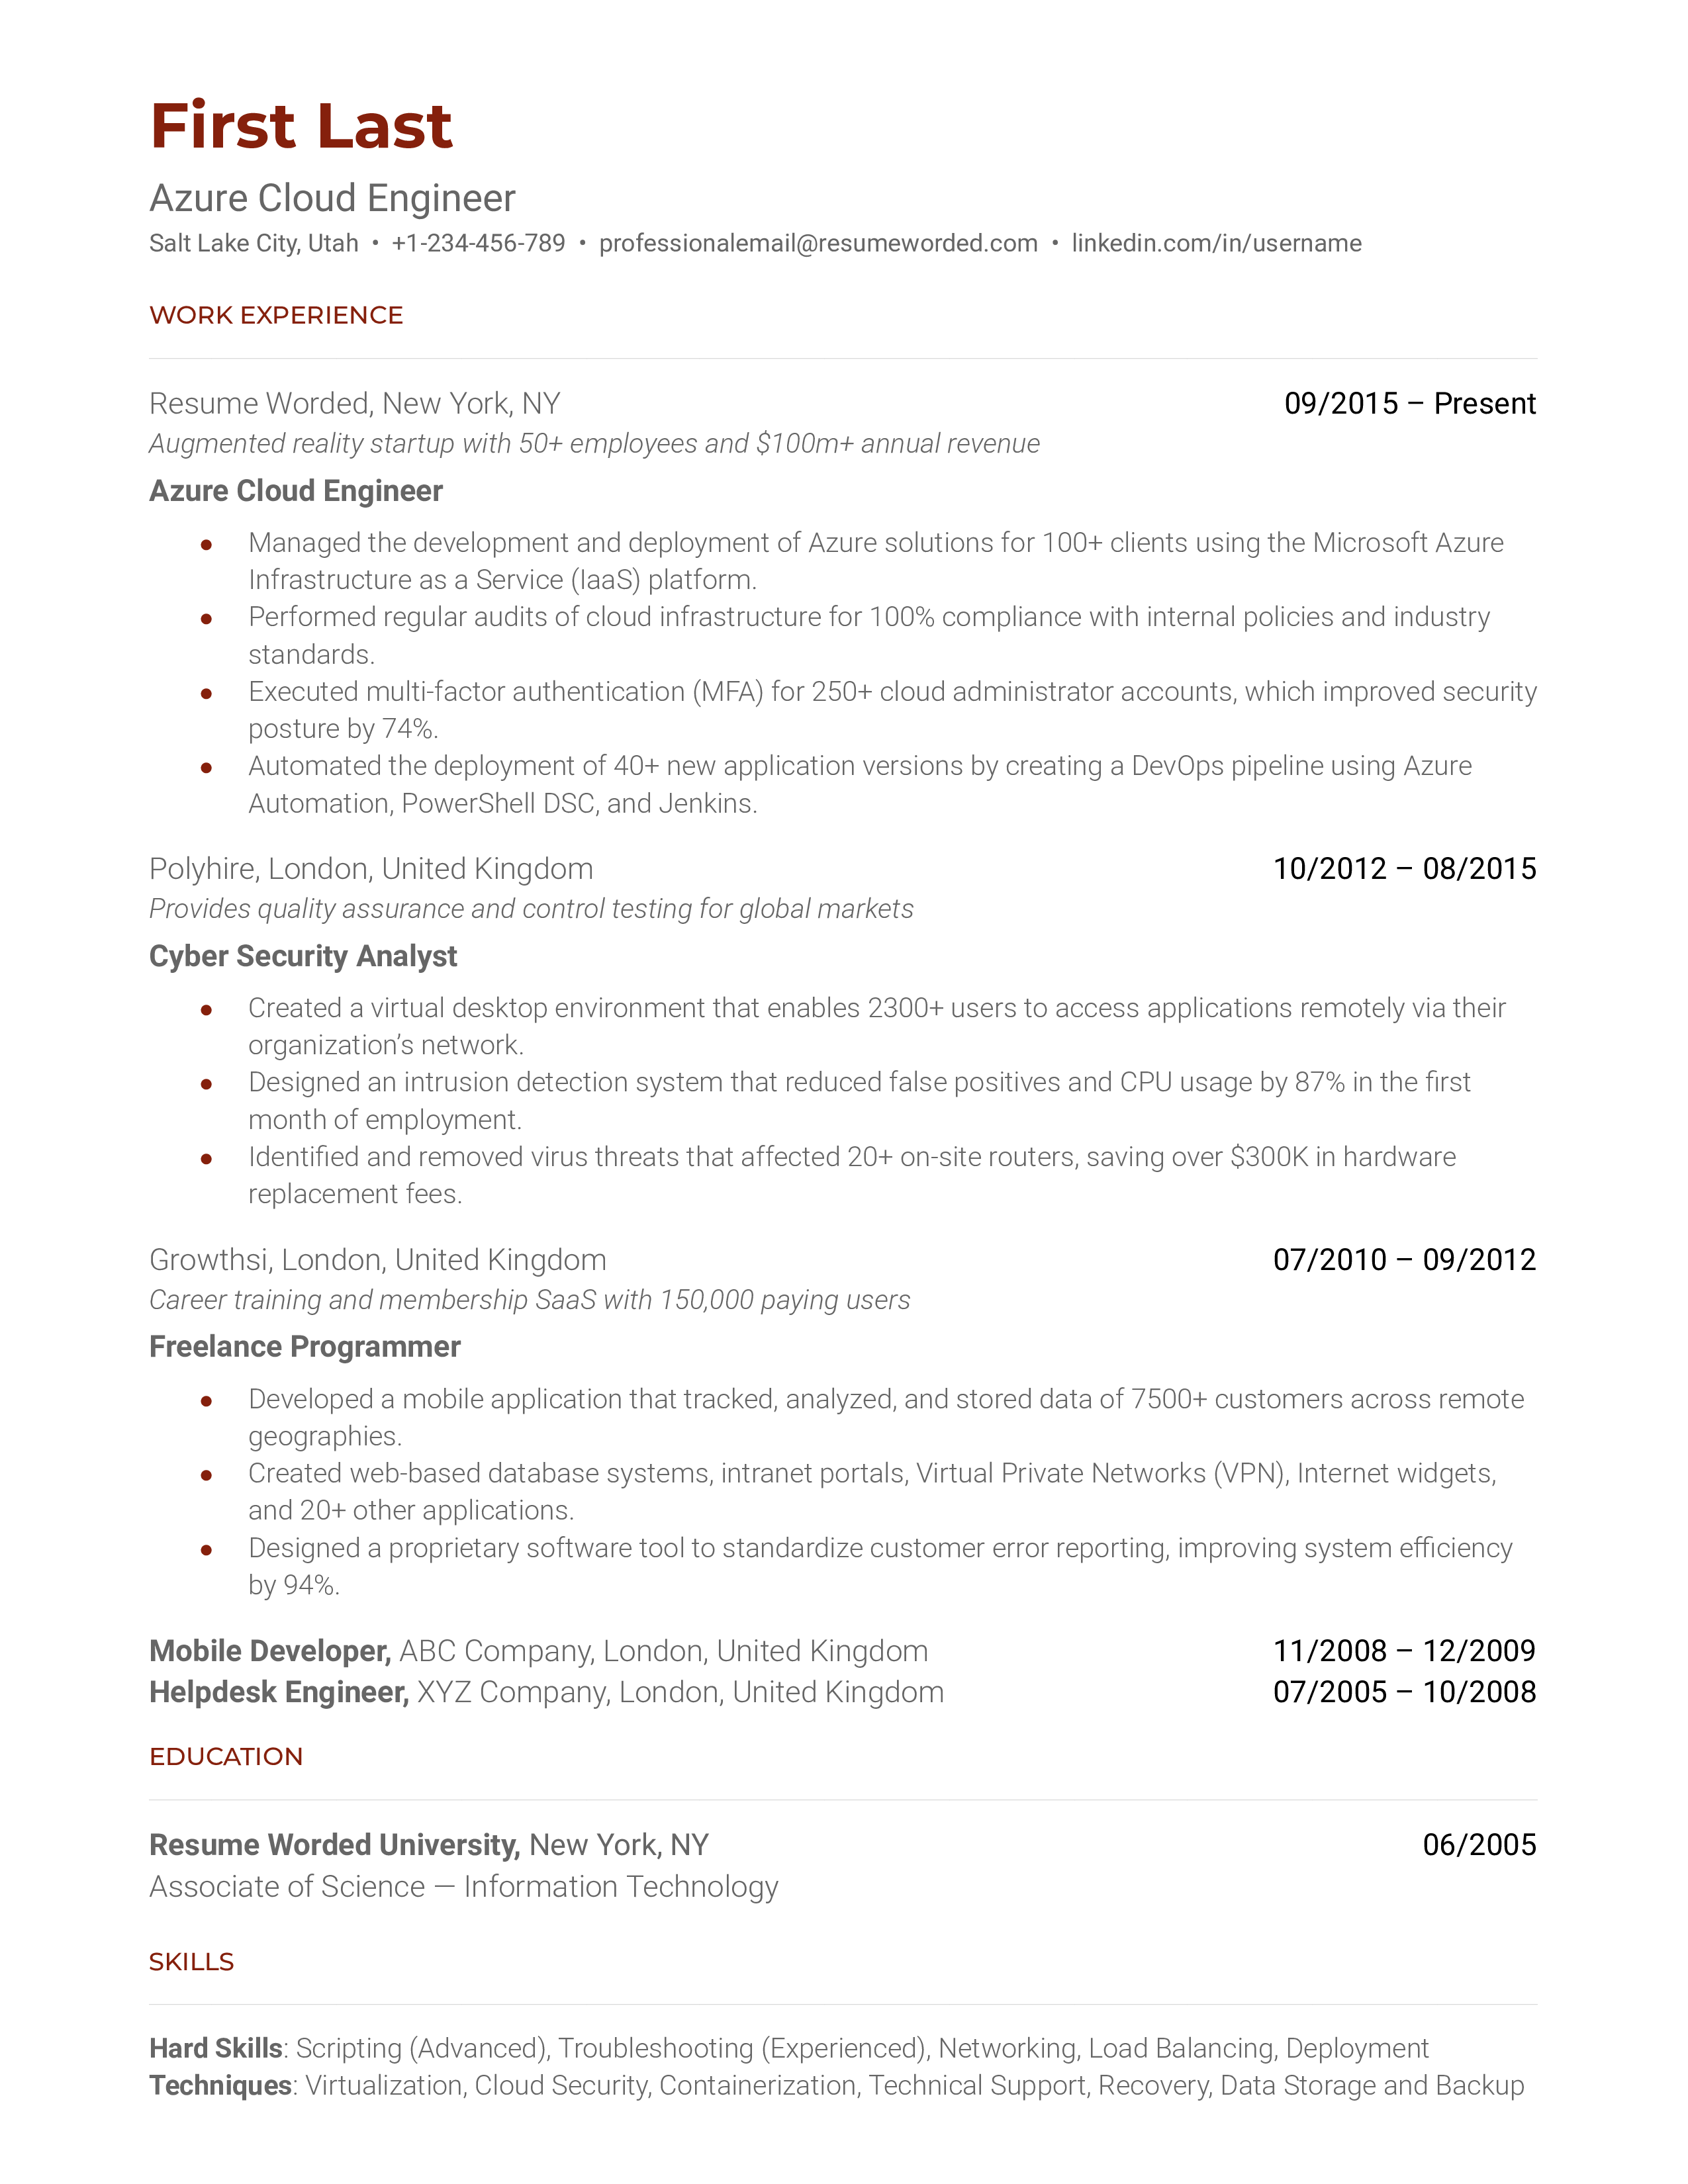 Azure Cloud Engineer resume sample and recommendations